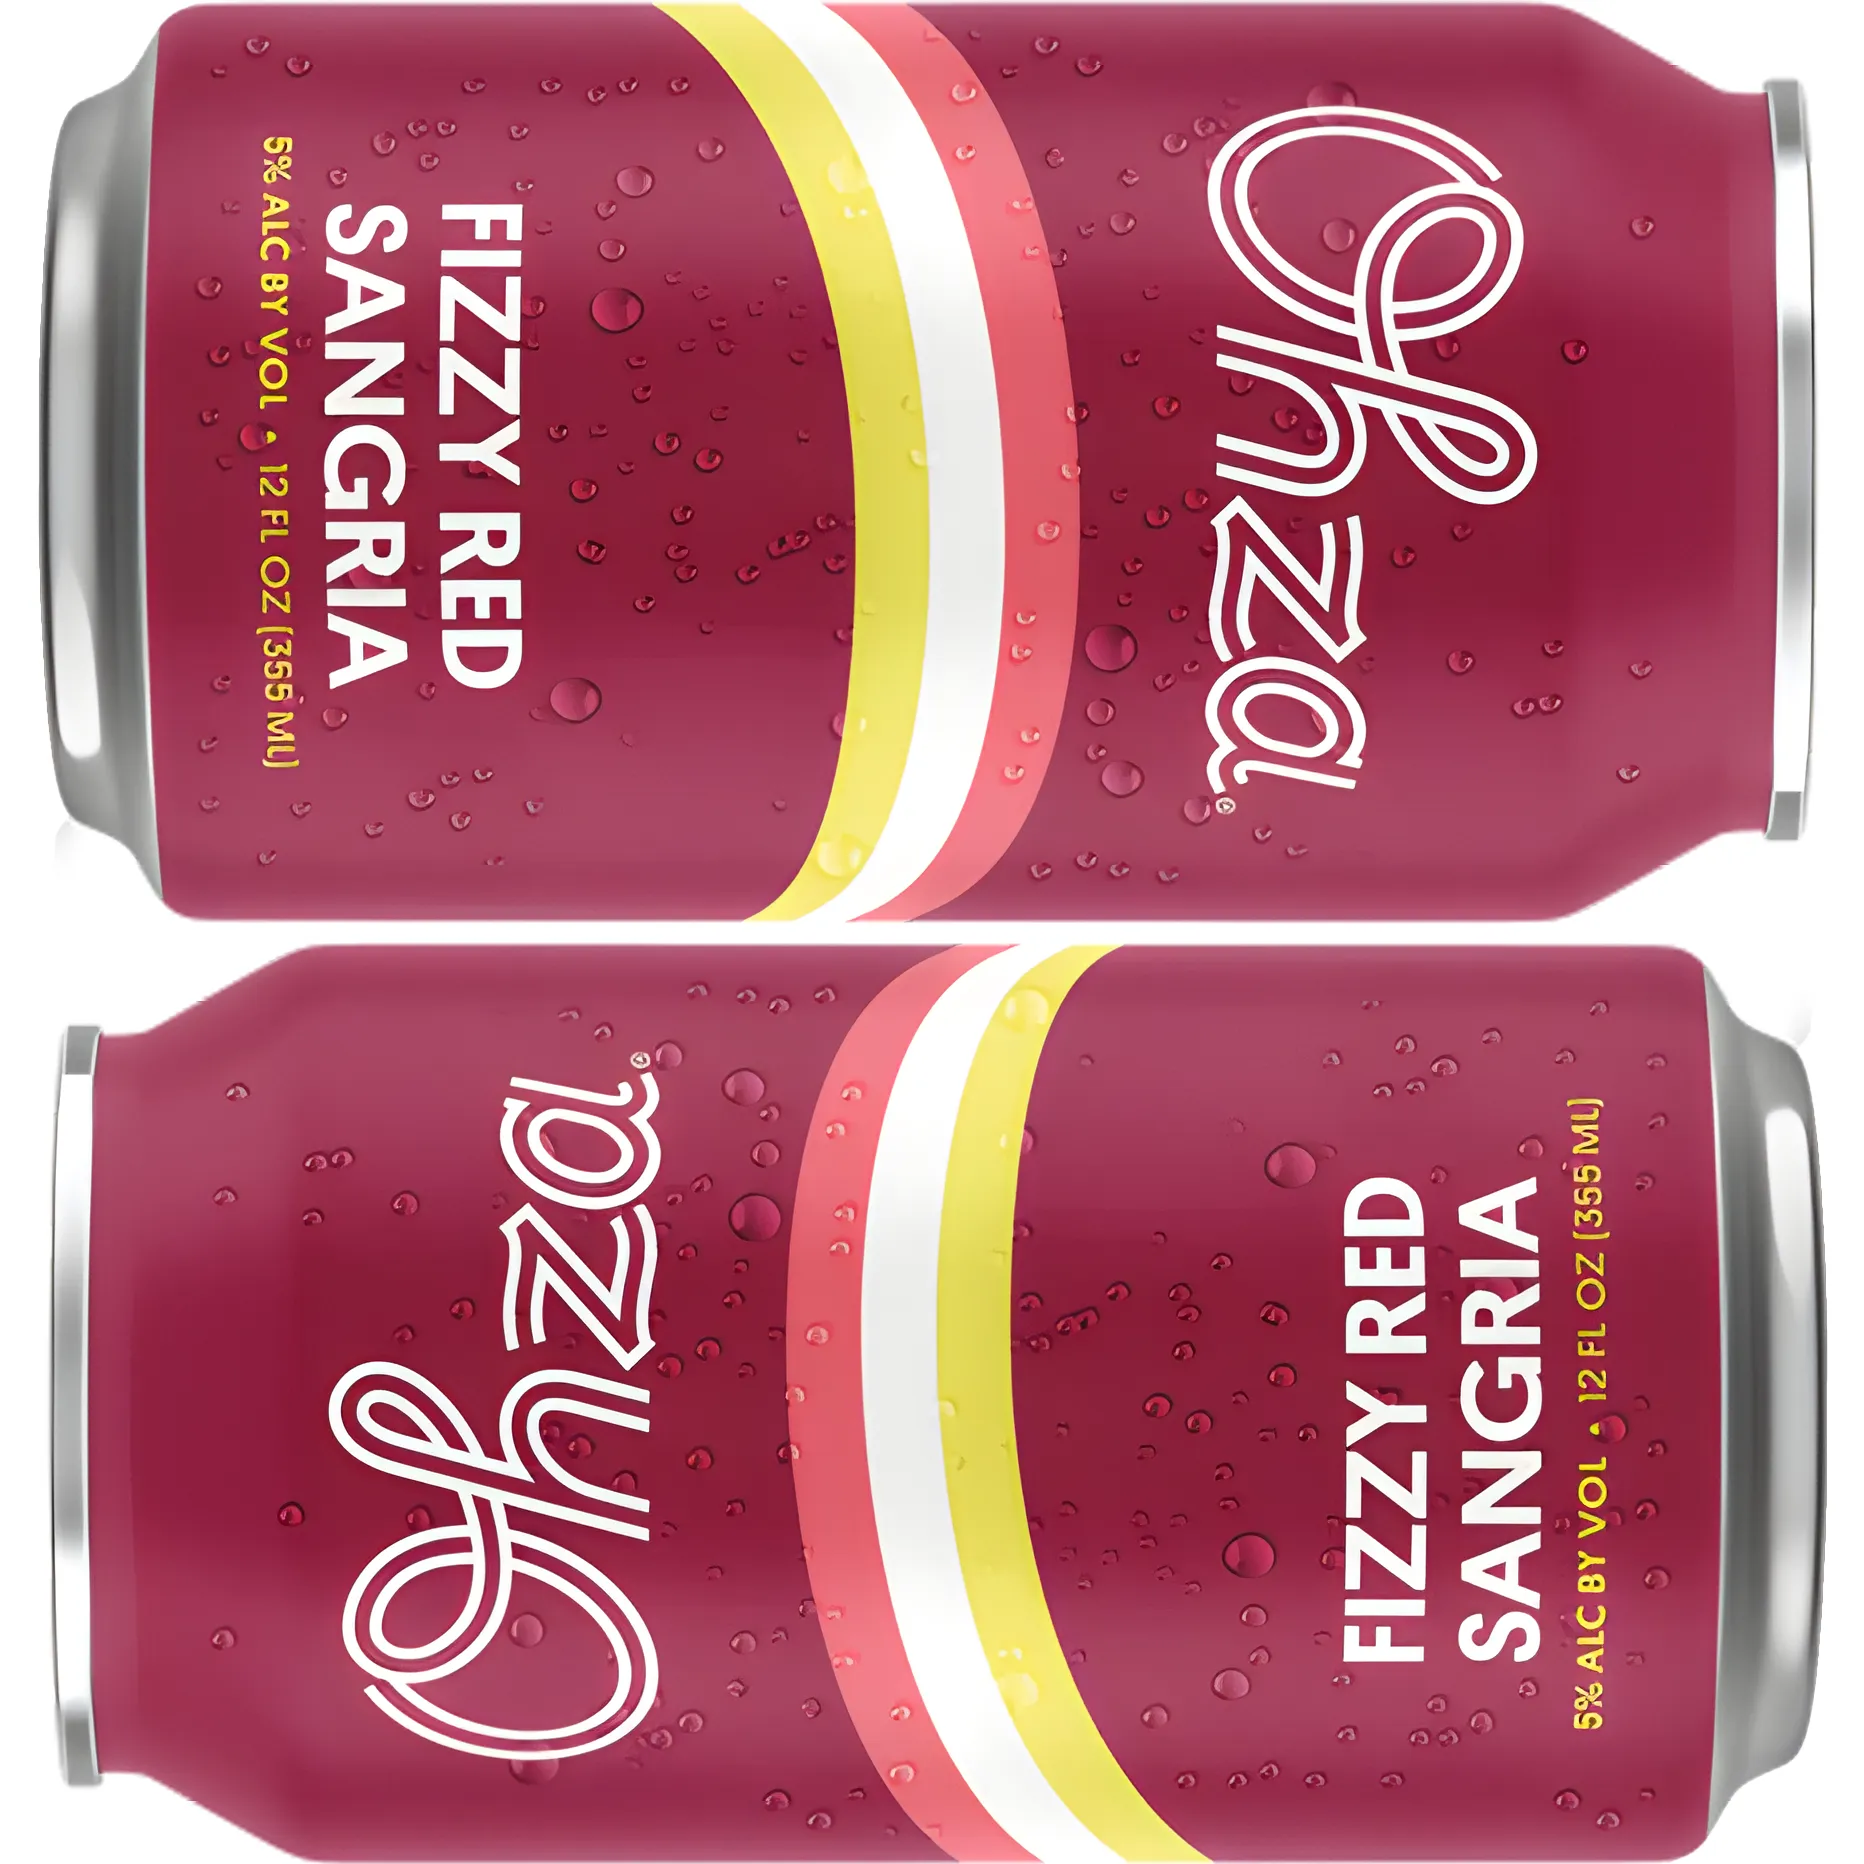 Free Ohza Original Canned Mimosa And Sangria